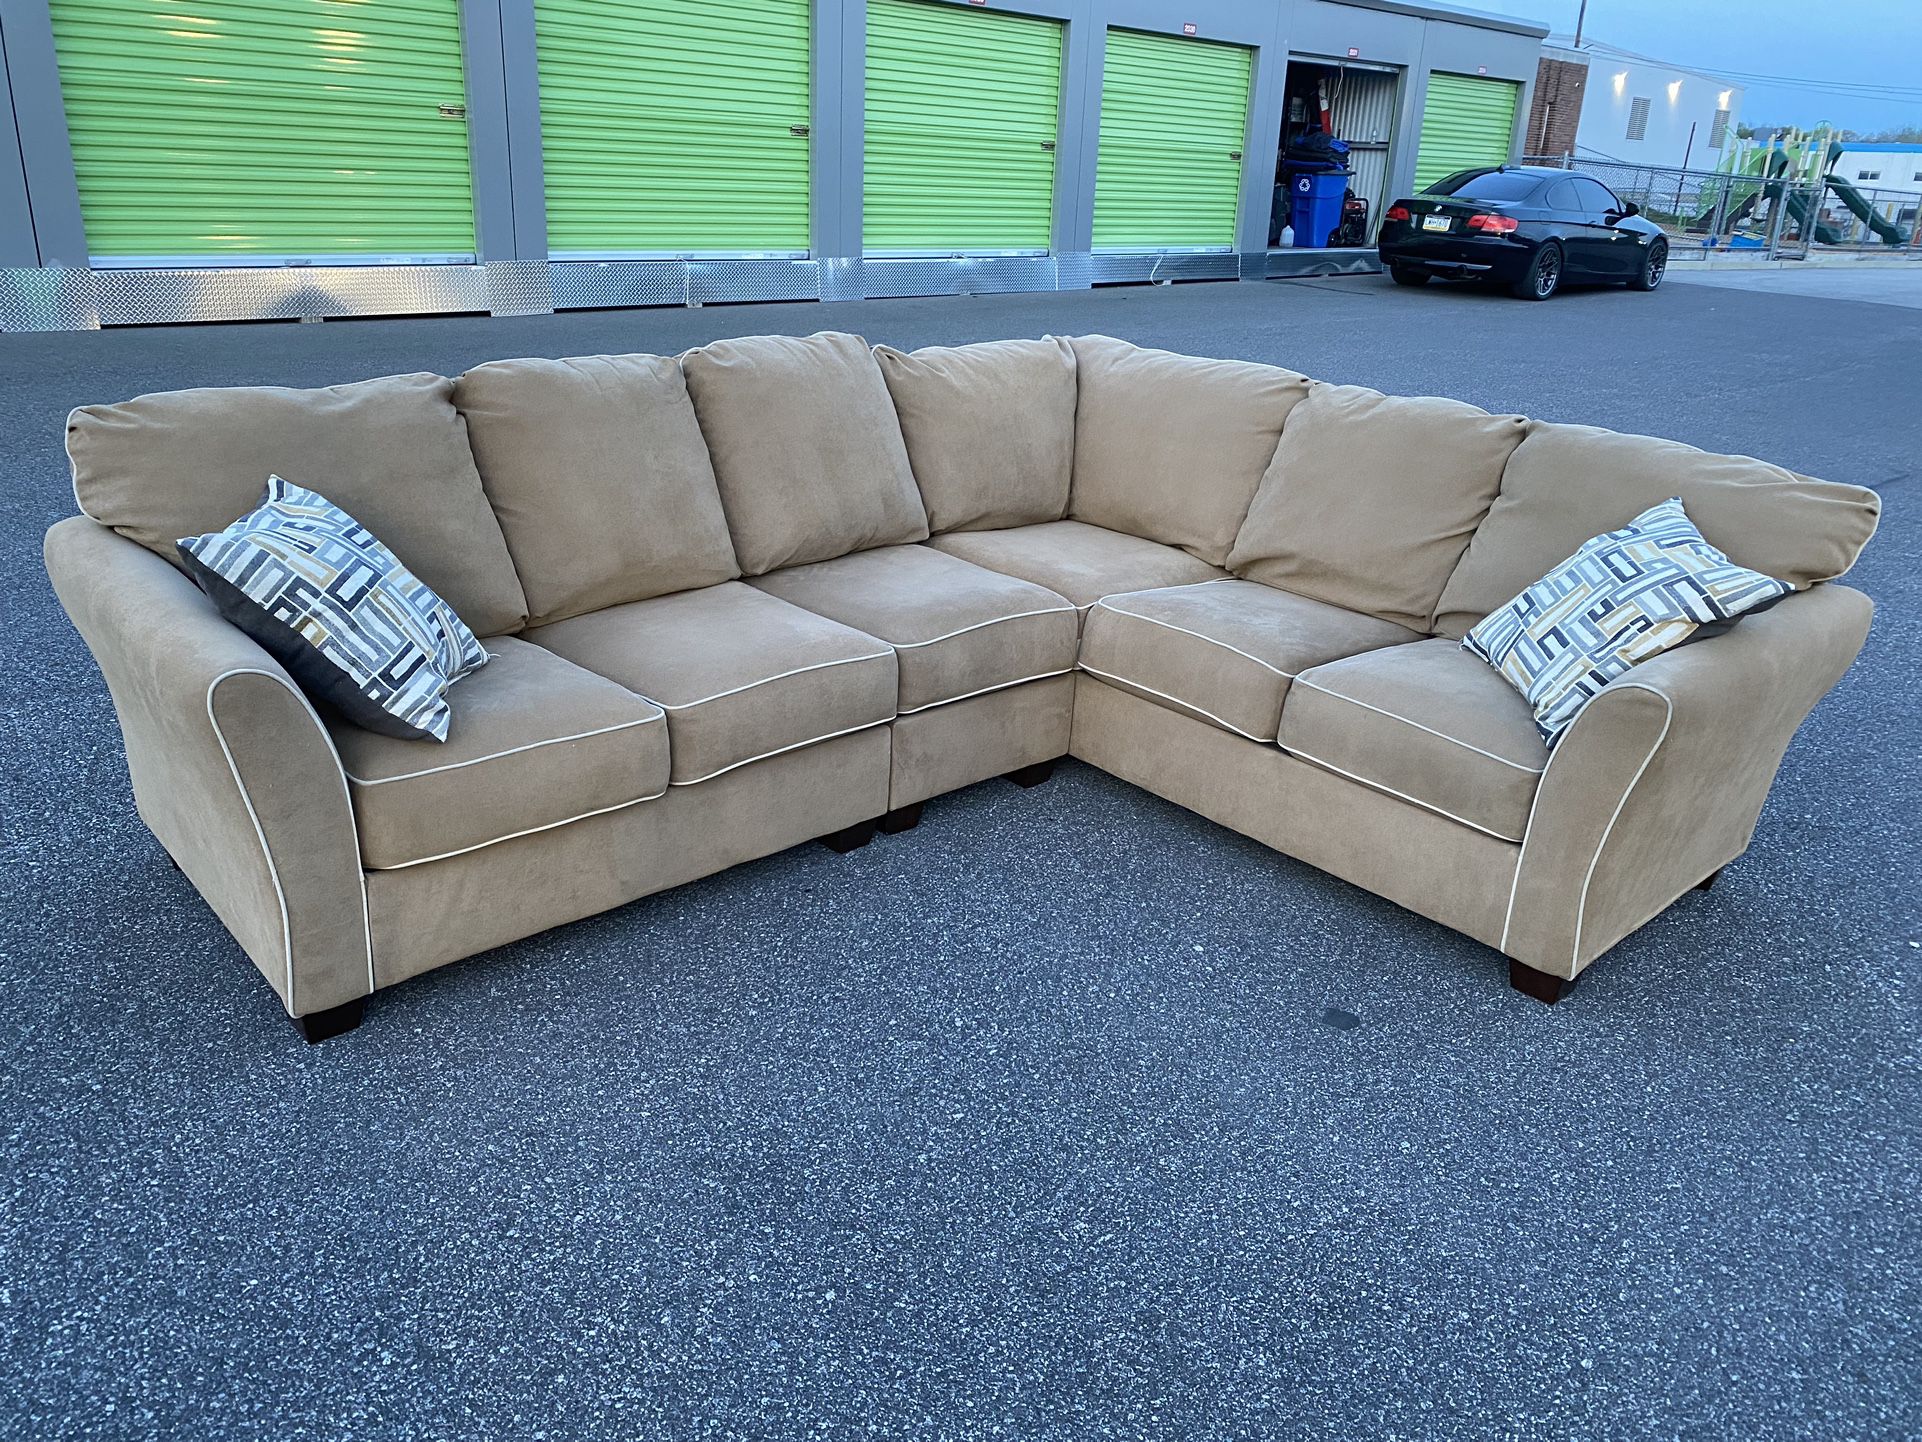 FREE DELIVERY AND INSTALLATION - Ashely Sectional Brown Color (Look our profile for more options)